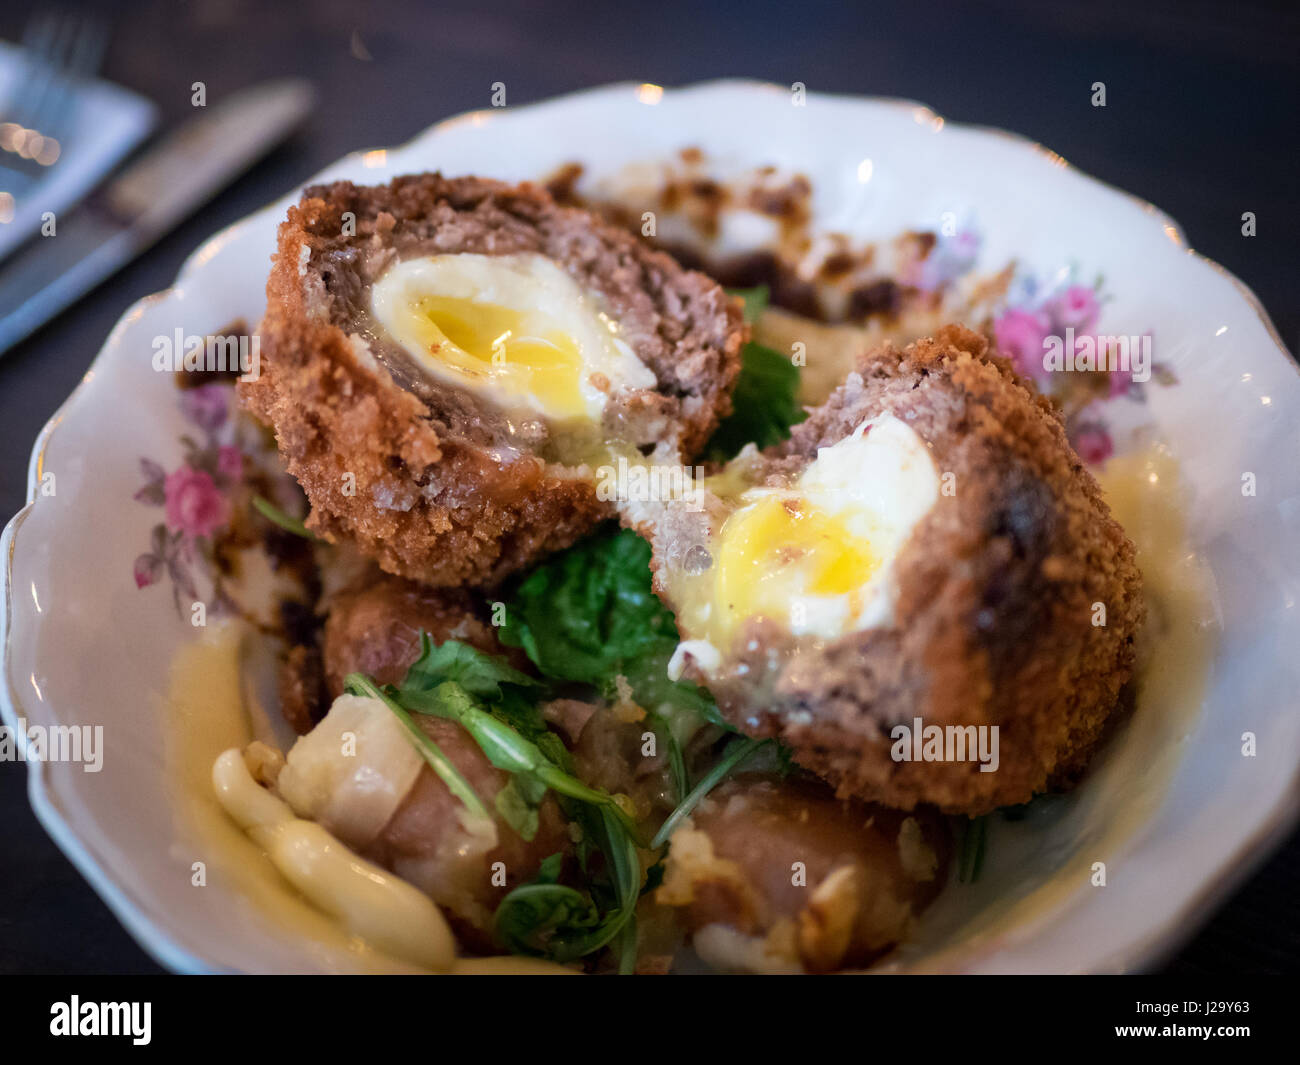 A Scotch egg for brunch at Chartier, a restaurant in Beaumont, Alberta, Canada. Stock Photo